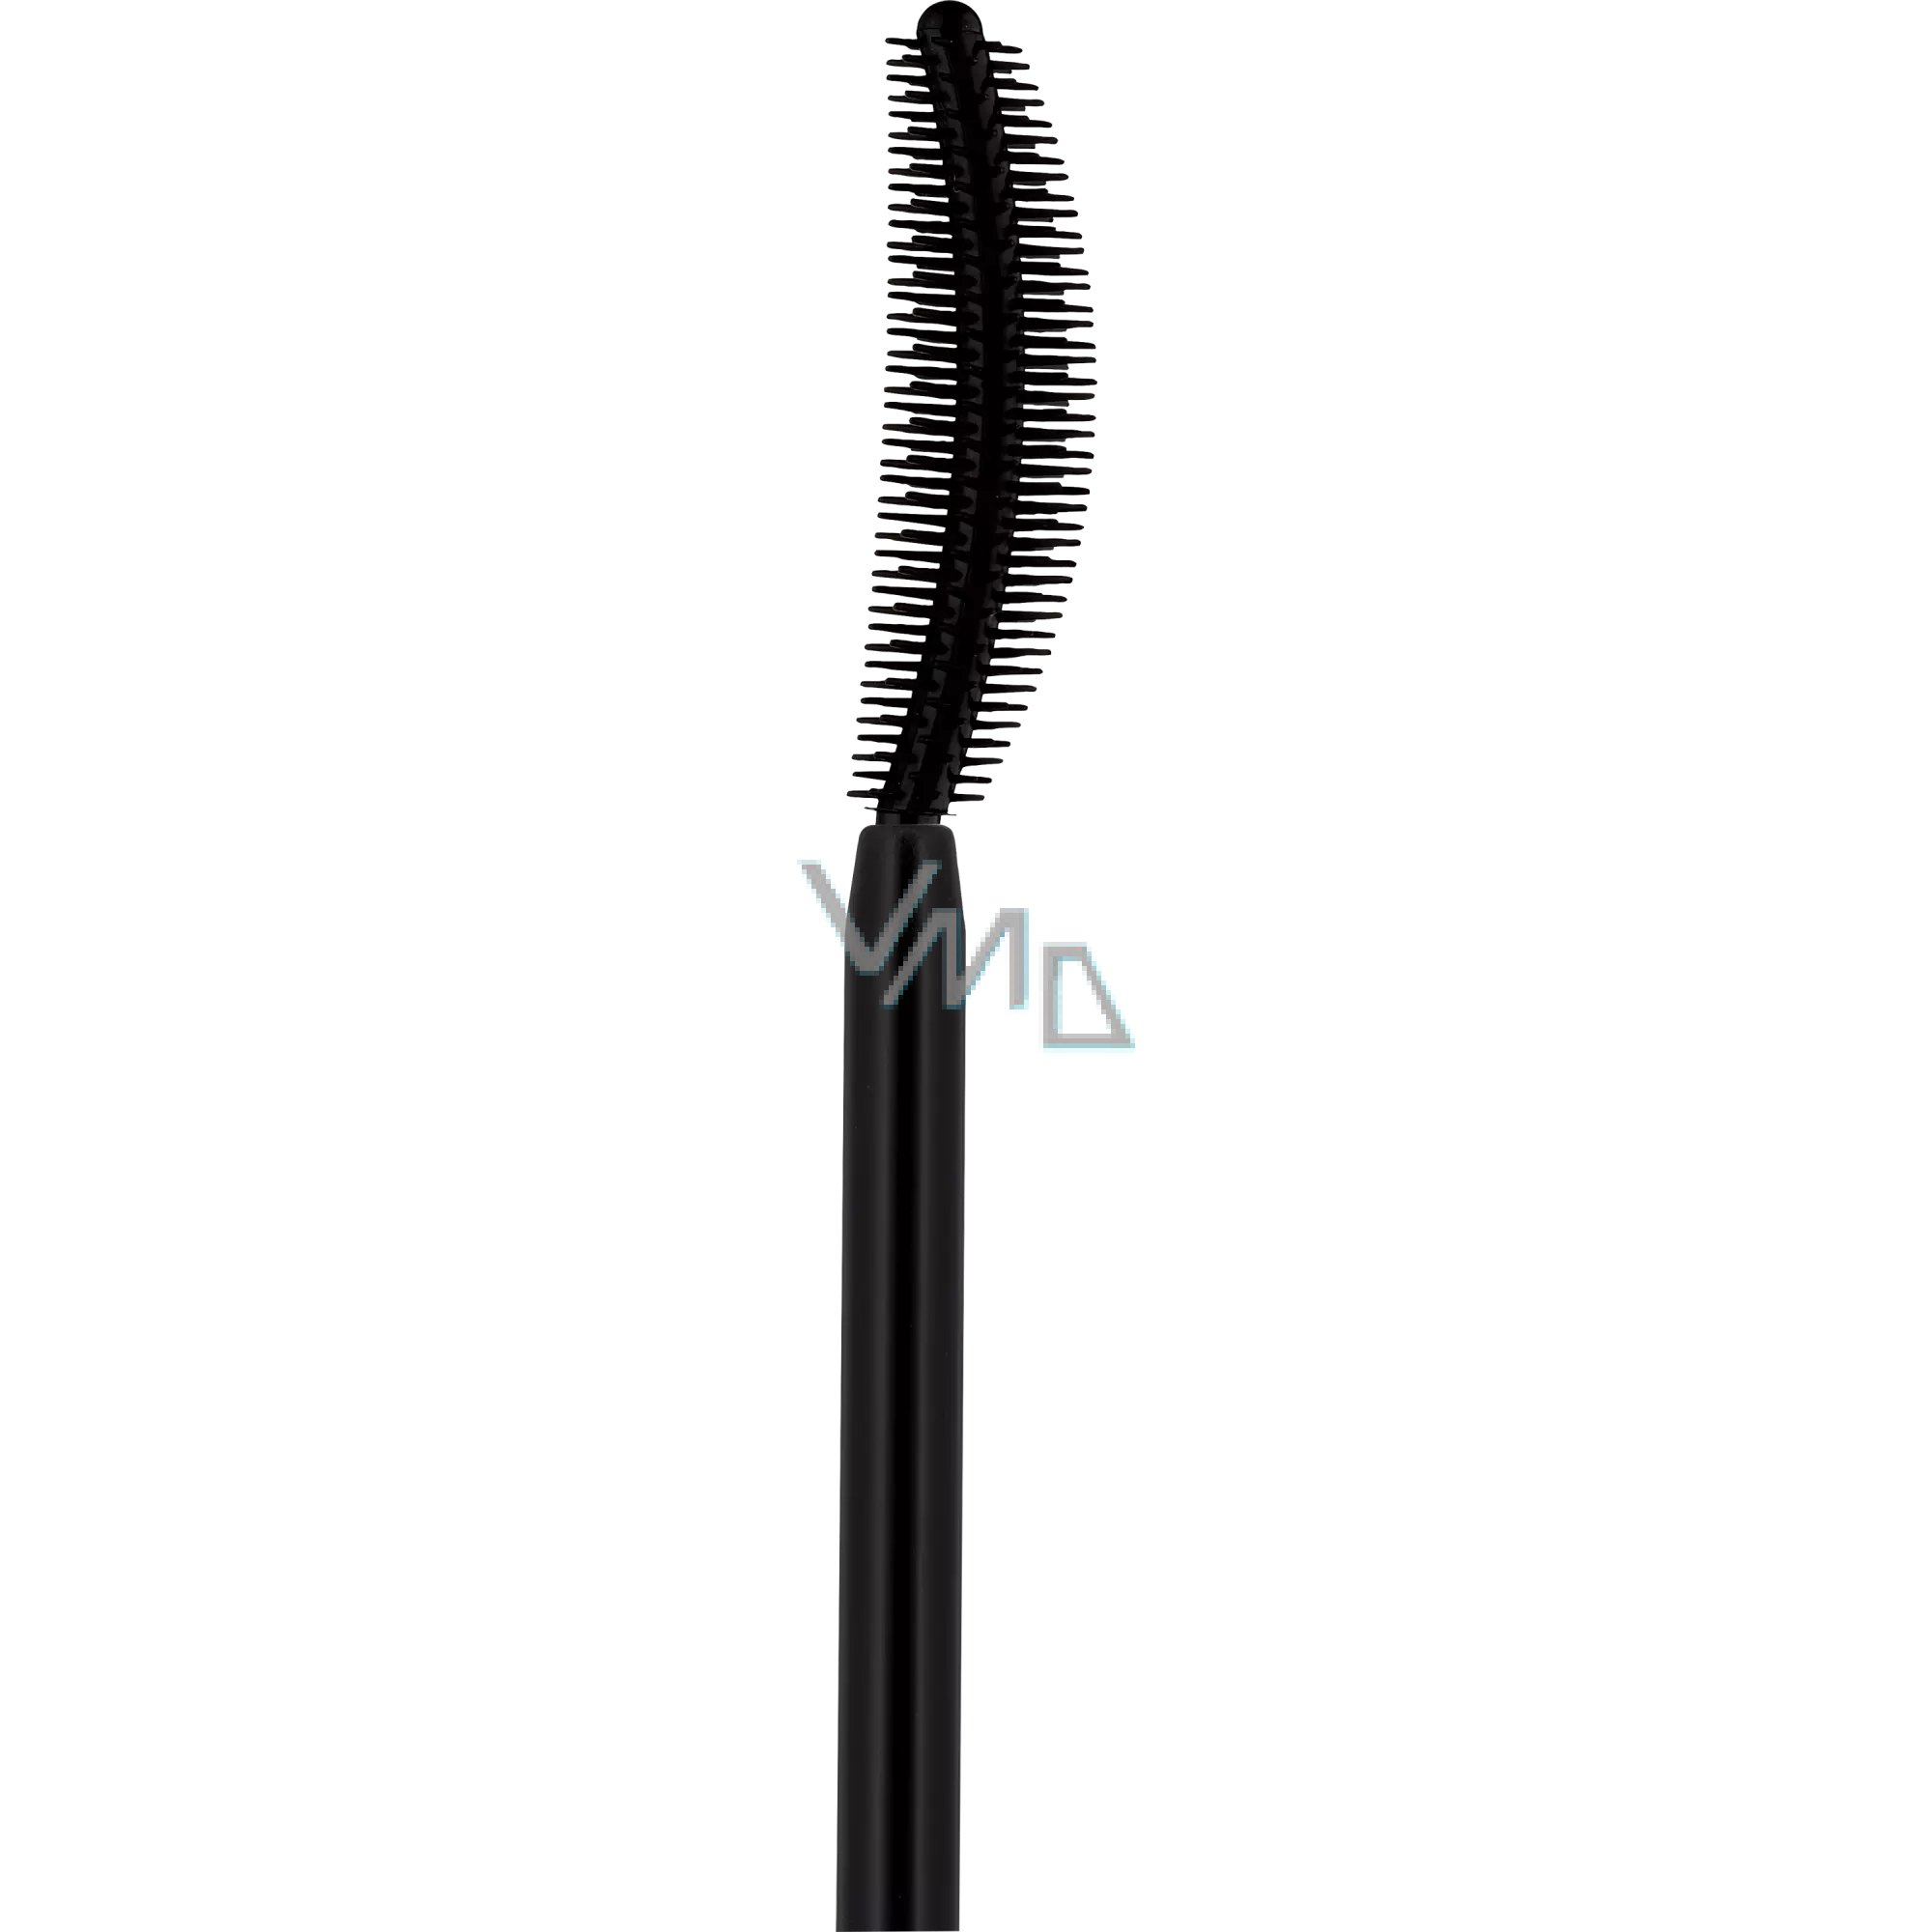 Essence Lash Like lengthen VMD drogerie Boss Mascara Instant 9.5 lashes - - ml Lift curl a parfumerie Curl & and to